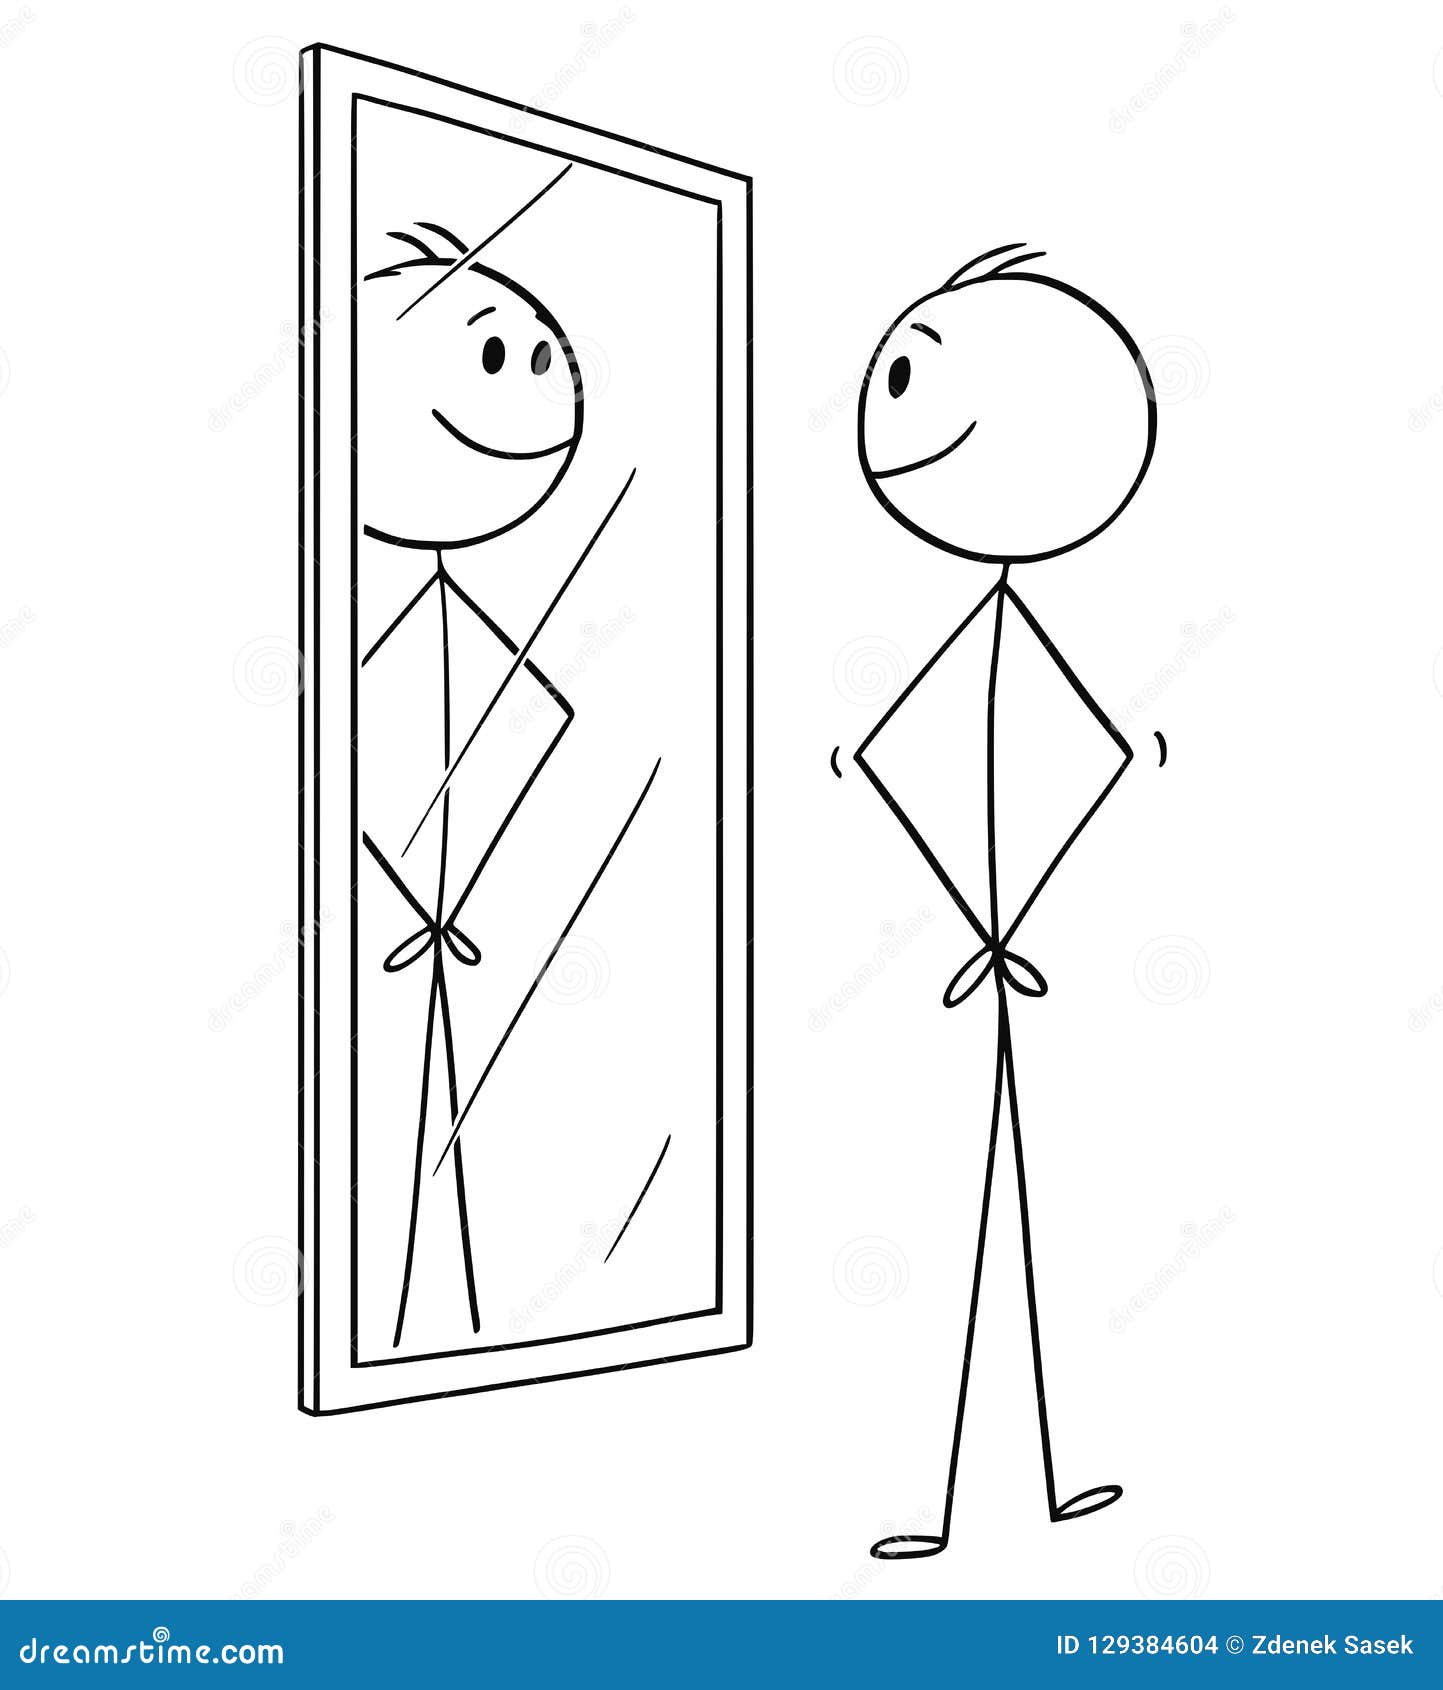 cartoon of smiling cheerful man looking at himself in the mirror